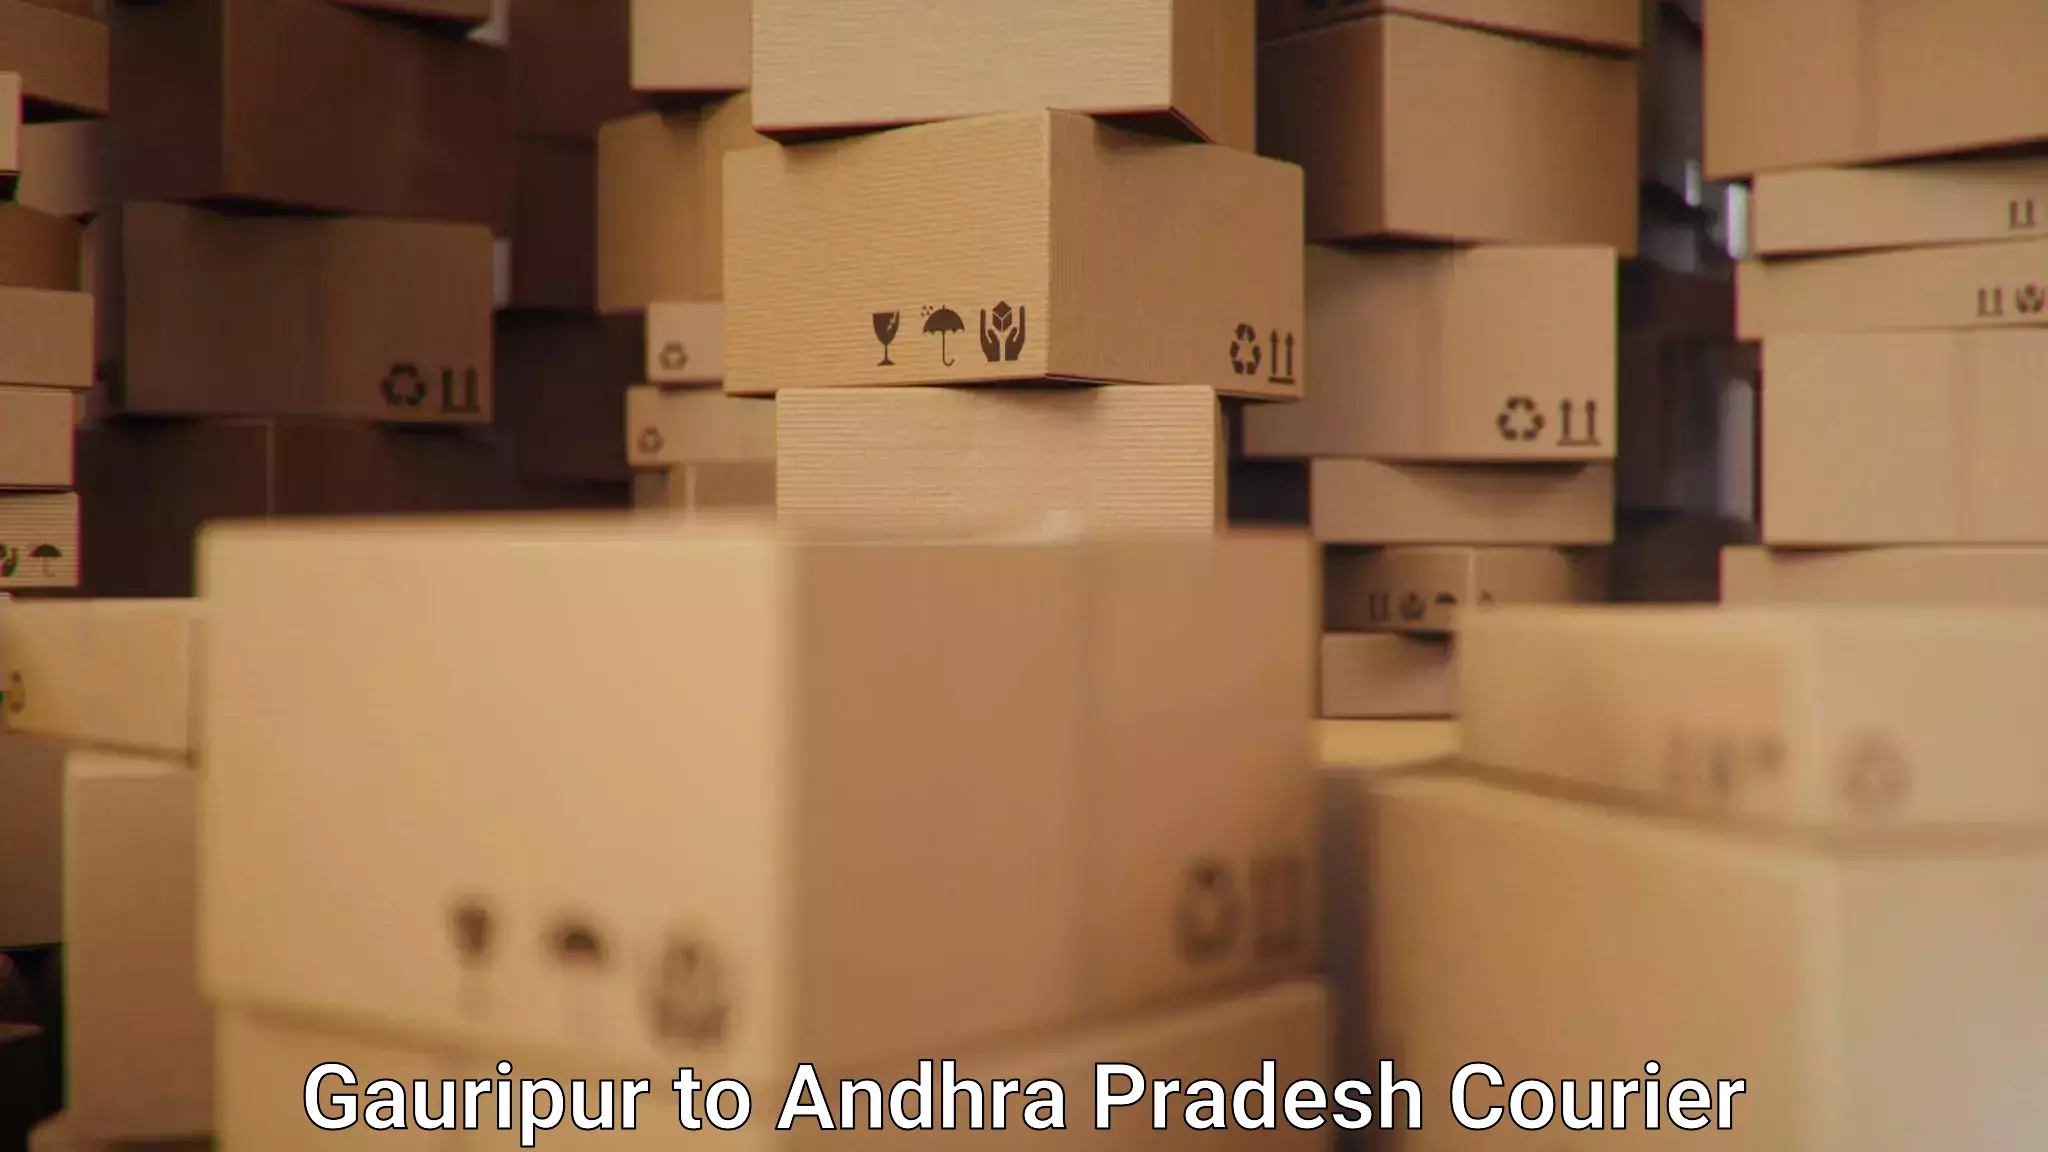 24-hour courier services in Gauripur to Tirupati